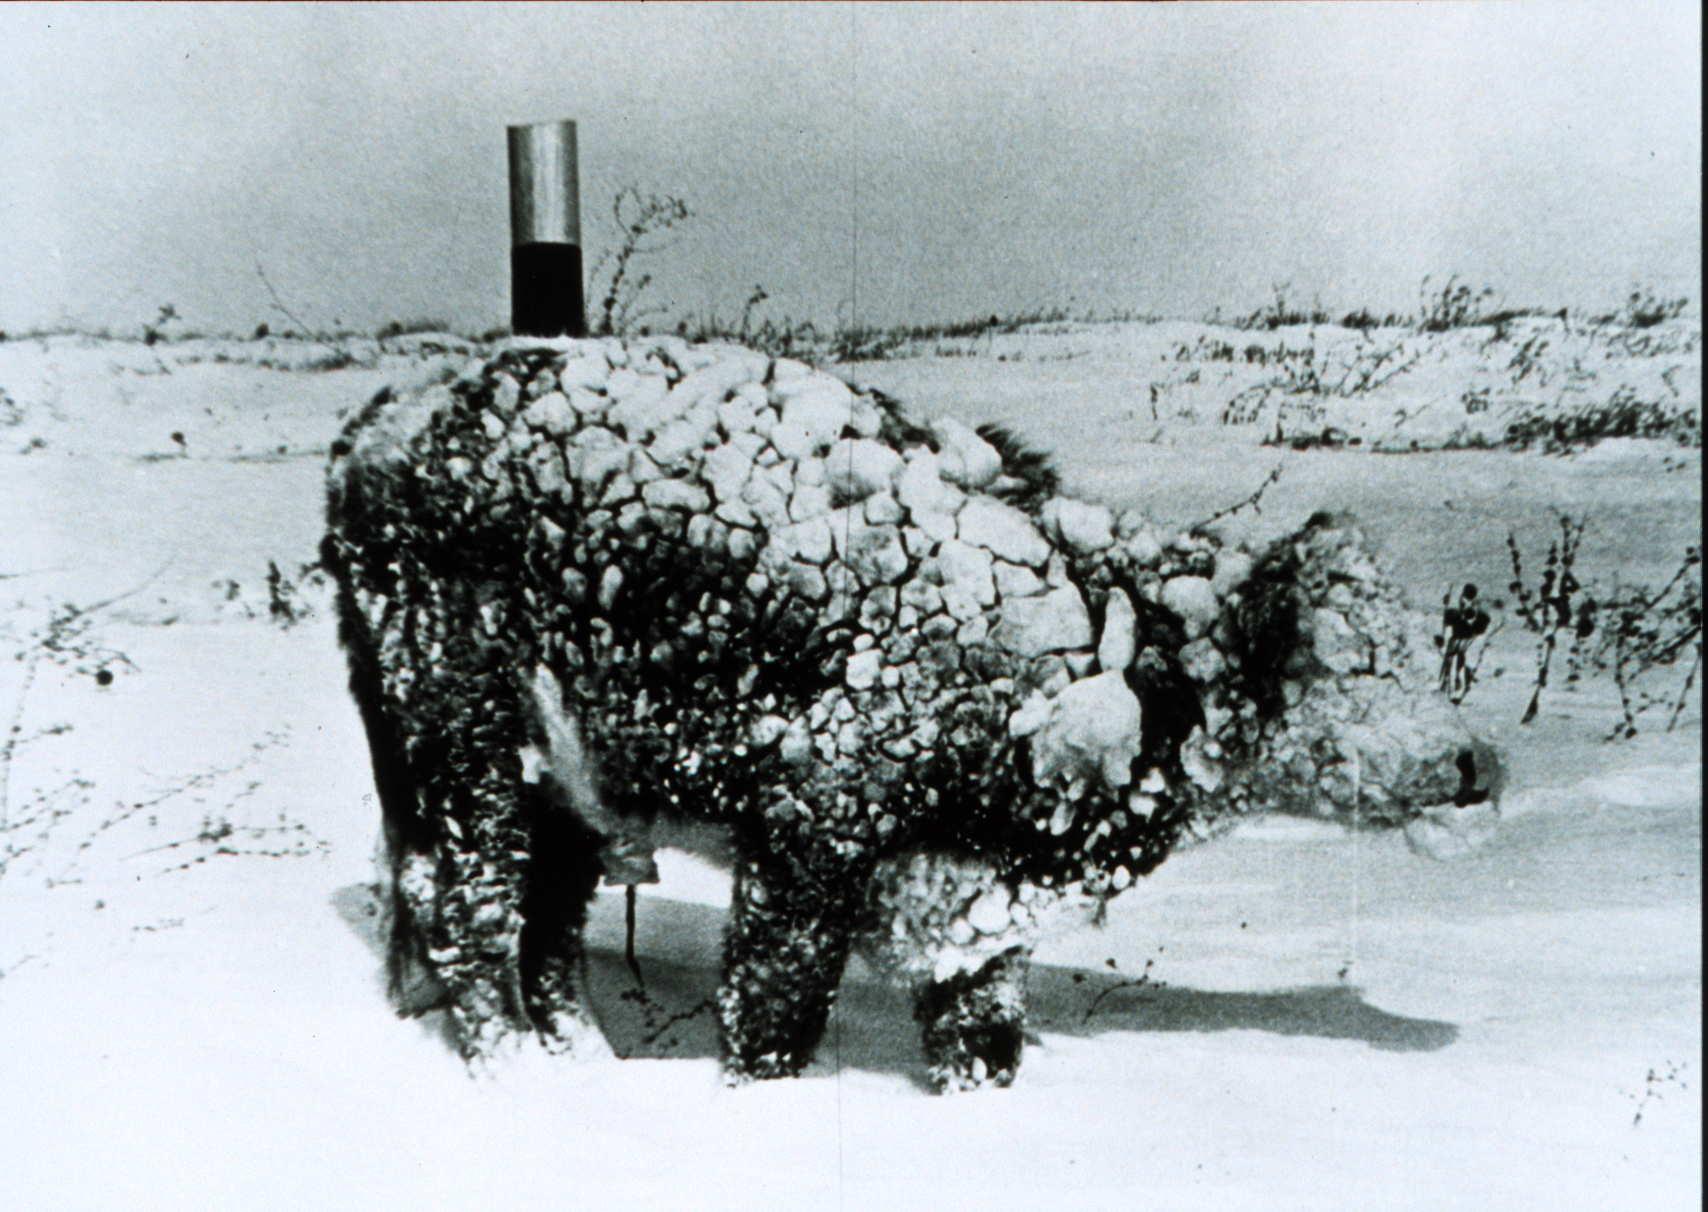 File:Young steer after blizzard - NOAA.jpg - Wikimedia Commons